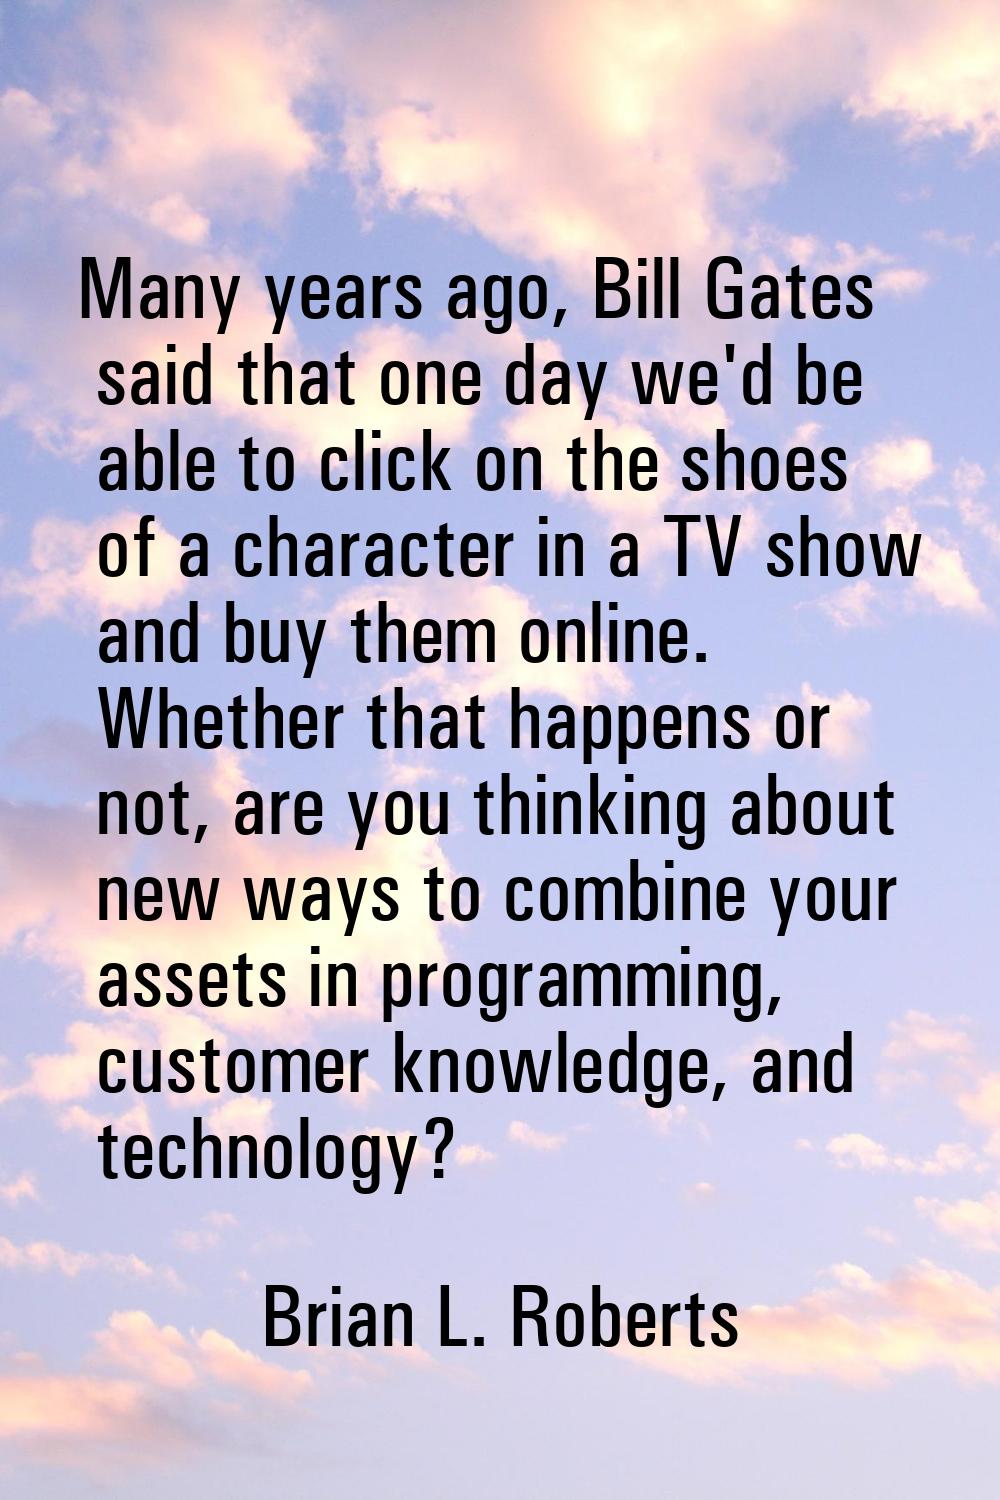 Many years ago, Bill Gates said that one day we'd be able to click on the shoes of a character in a